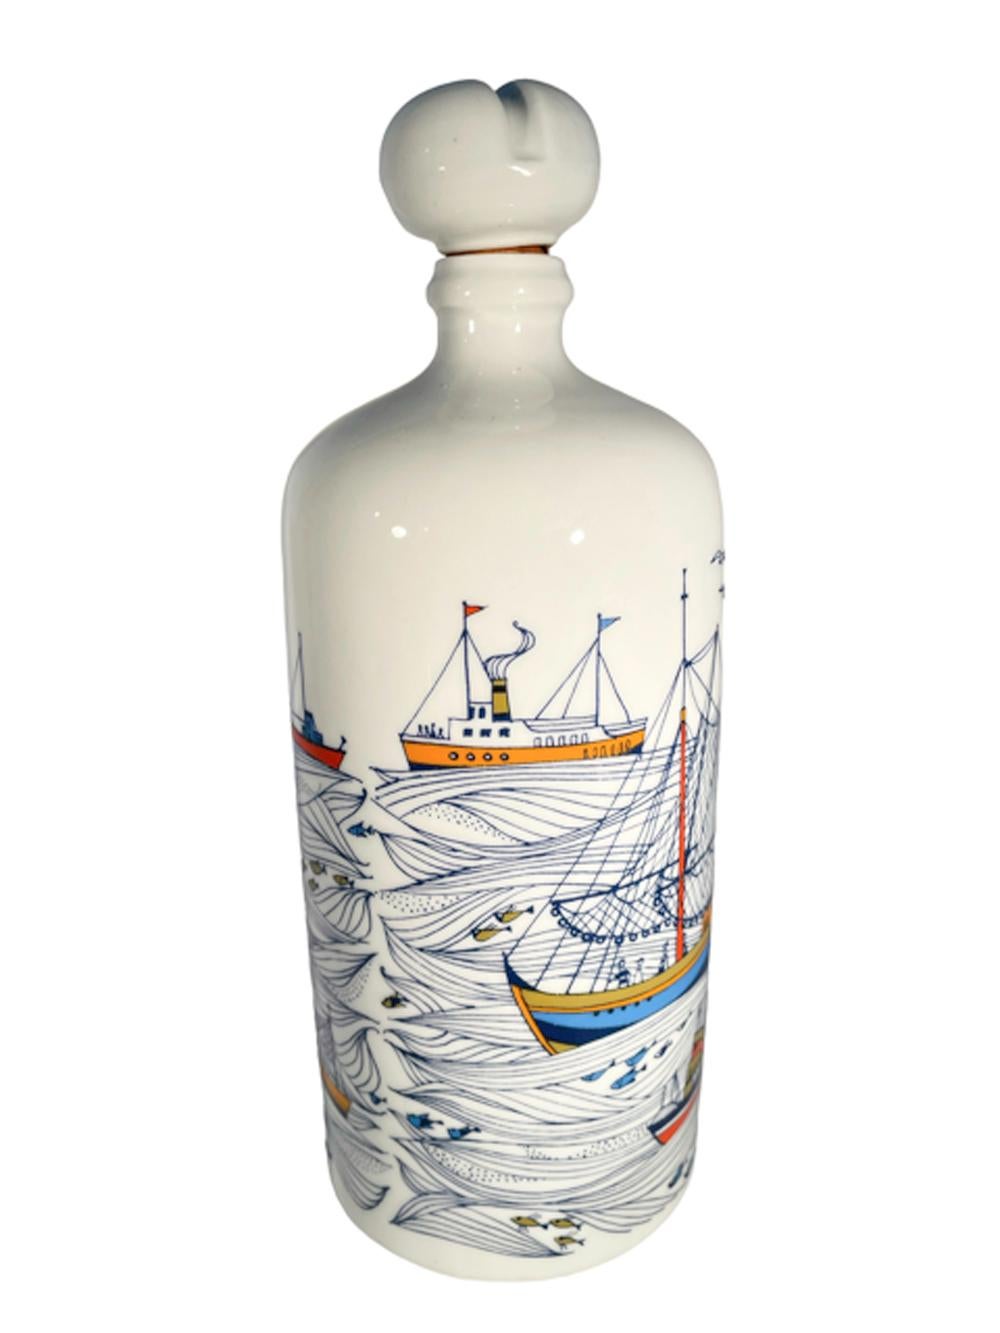 Mid-Century Modern porcelain decanter made in Western Germany and decorated in colored enamels with birds flying over various pleasure and work boats in a harbor scene, porcelain ball top with cork stopper.